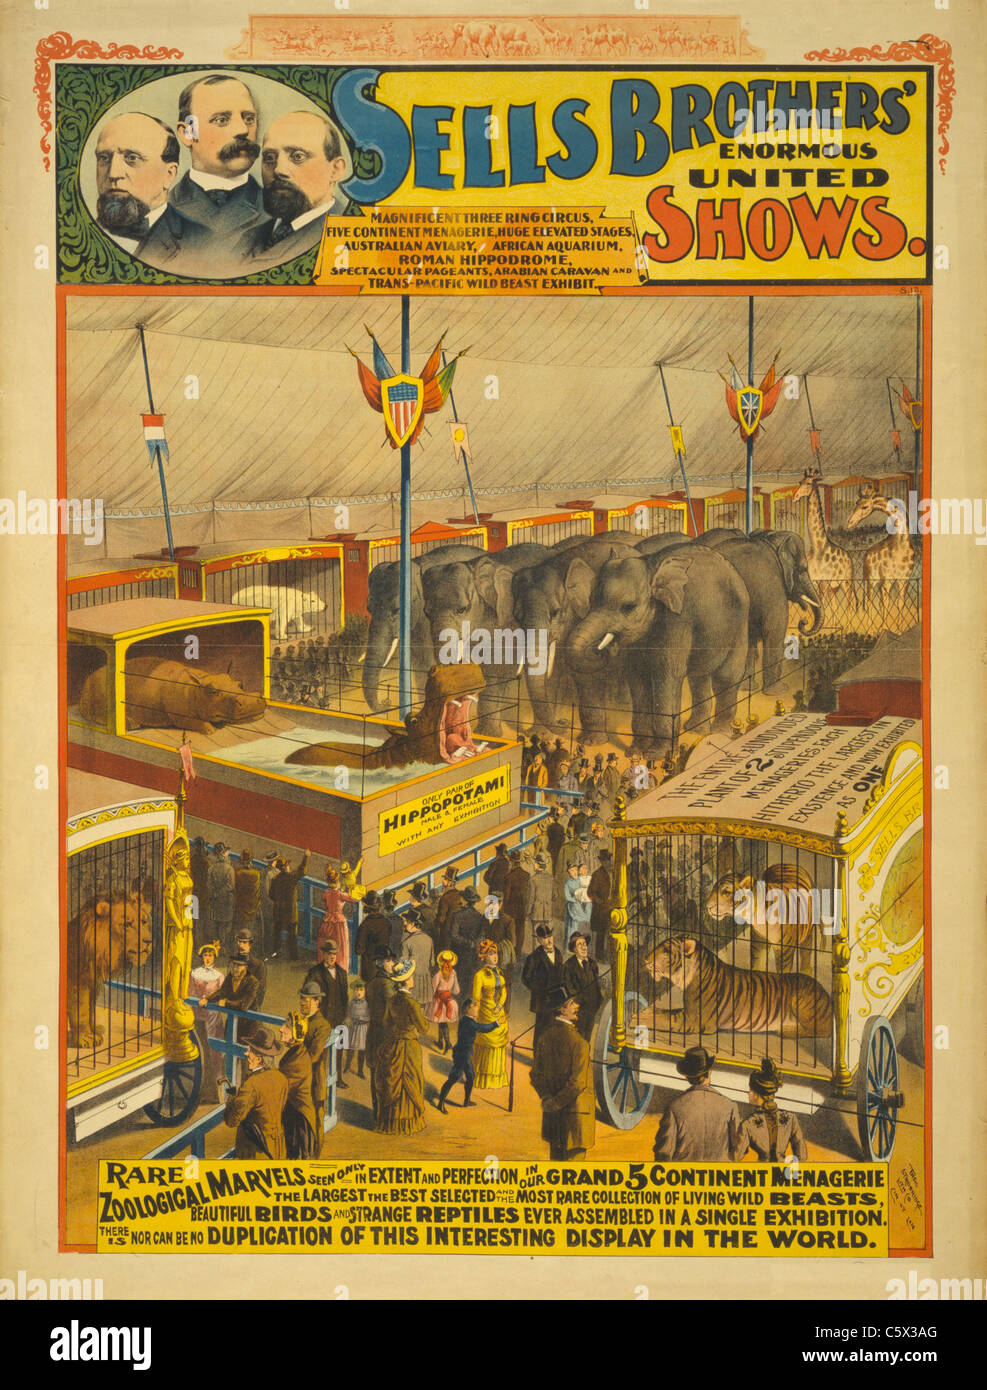 Sells Brothers Zoological Marvels - Old Circus Poster Stock Photo